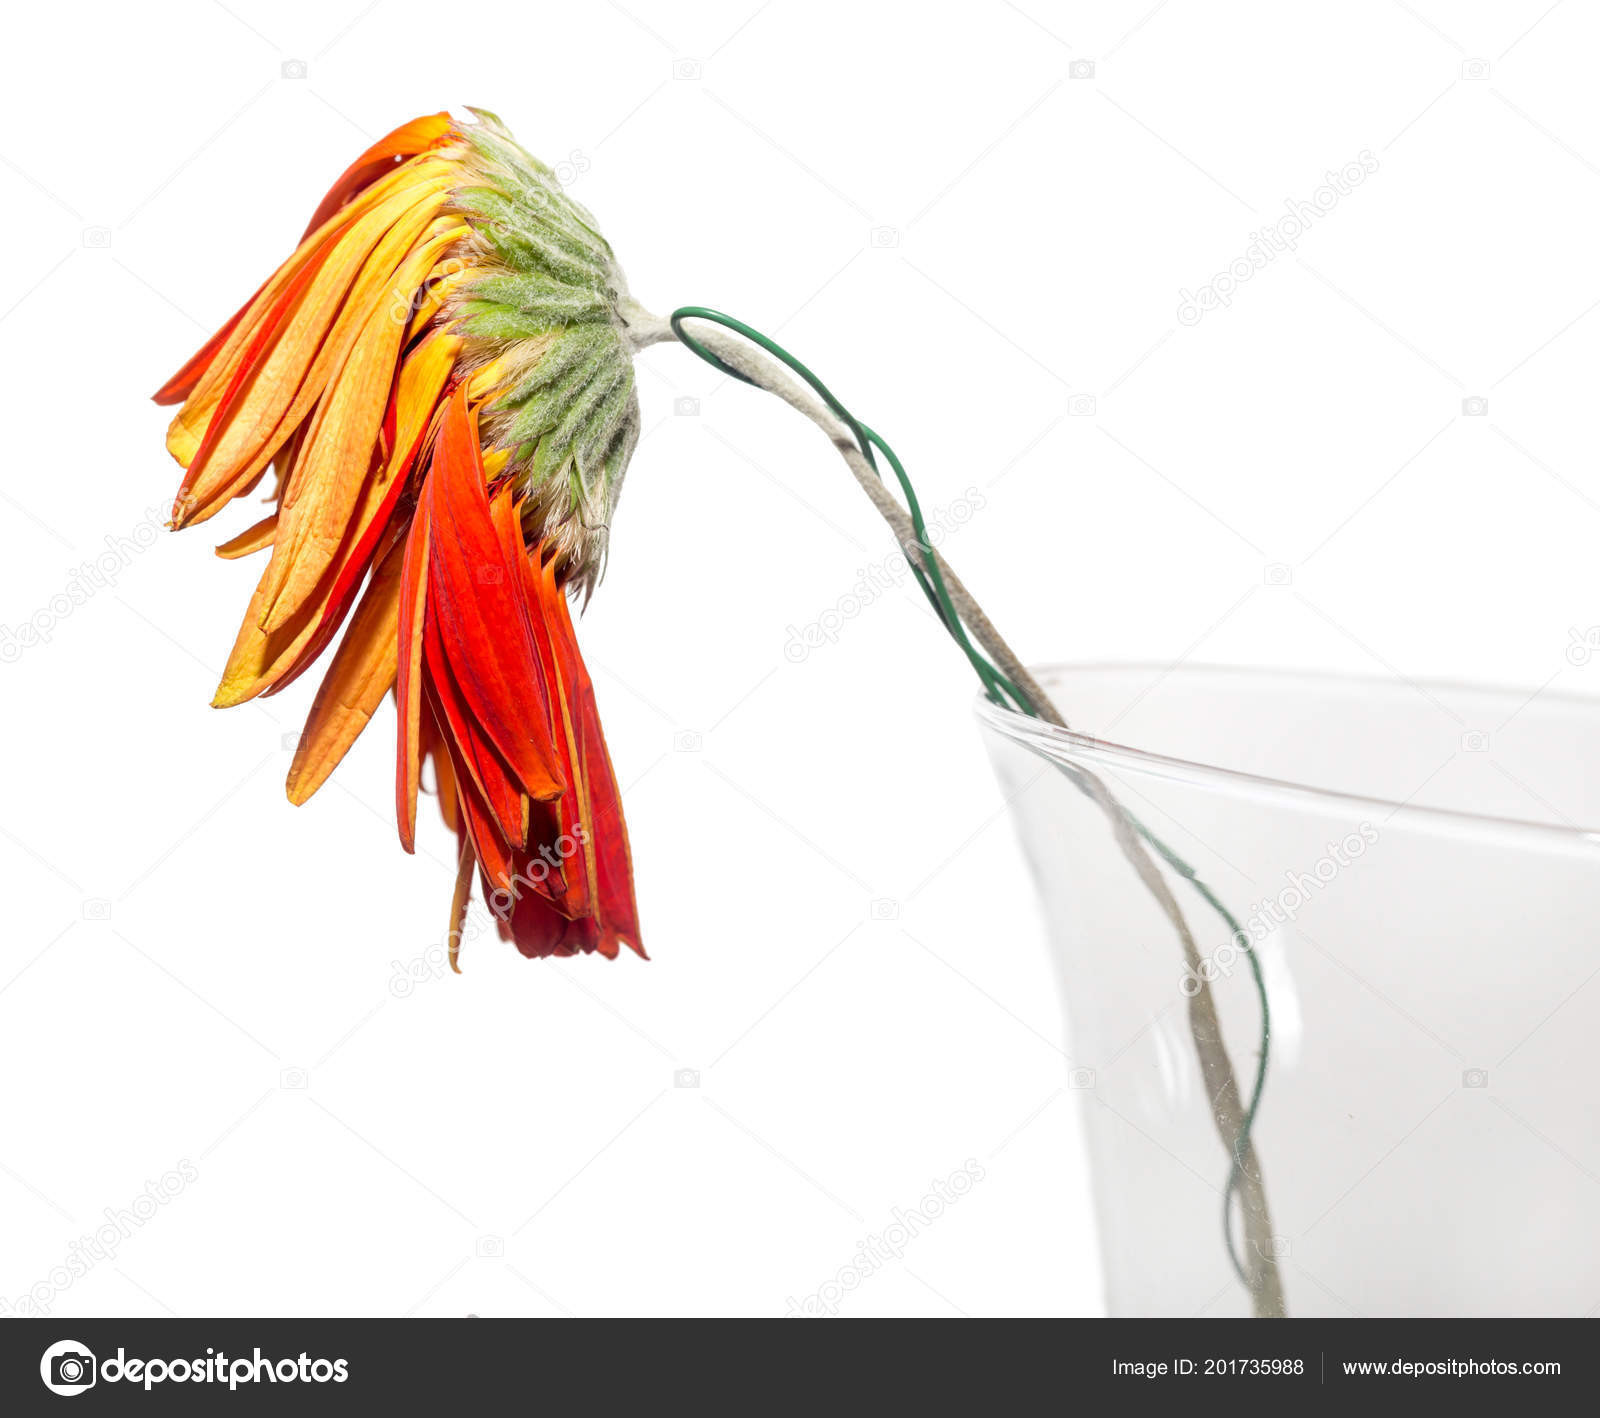 19 Amazing Gerbera Daisy In Vase 2024 free download gerbera daisy in vase of withered flower gerbera genus plants asteraceae daisy family glass inside withered flower gerbera genus plants asteraceae daisy family glass vase zdjac299cie stockow